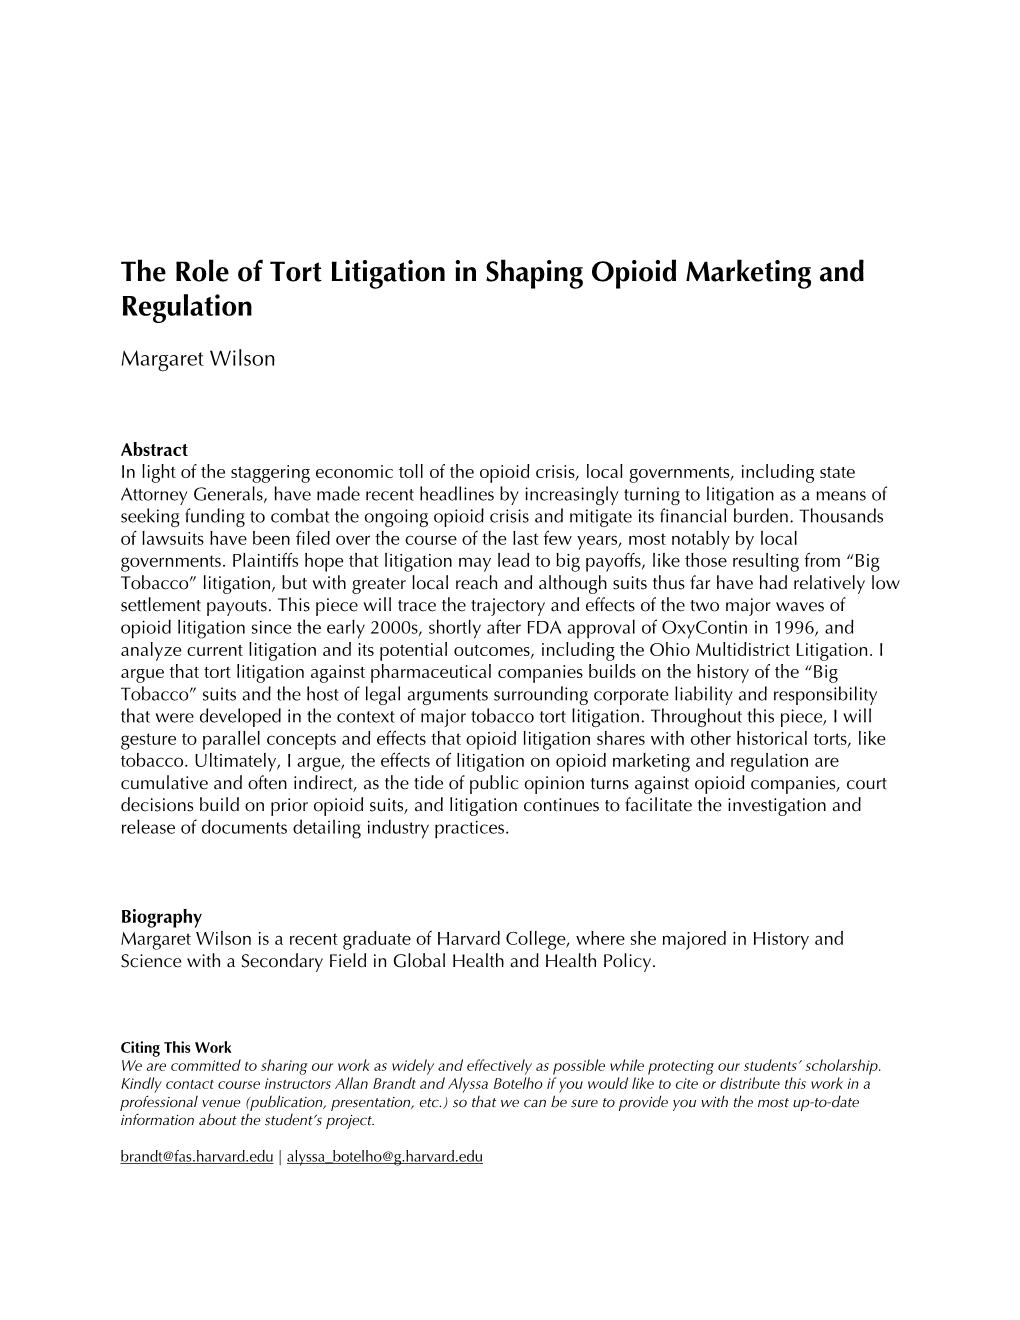 The Role of Tort Litigation in Shaping Opioid Marketing and Regulation